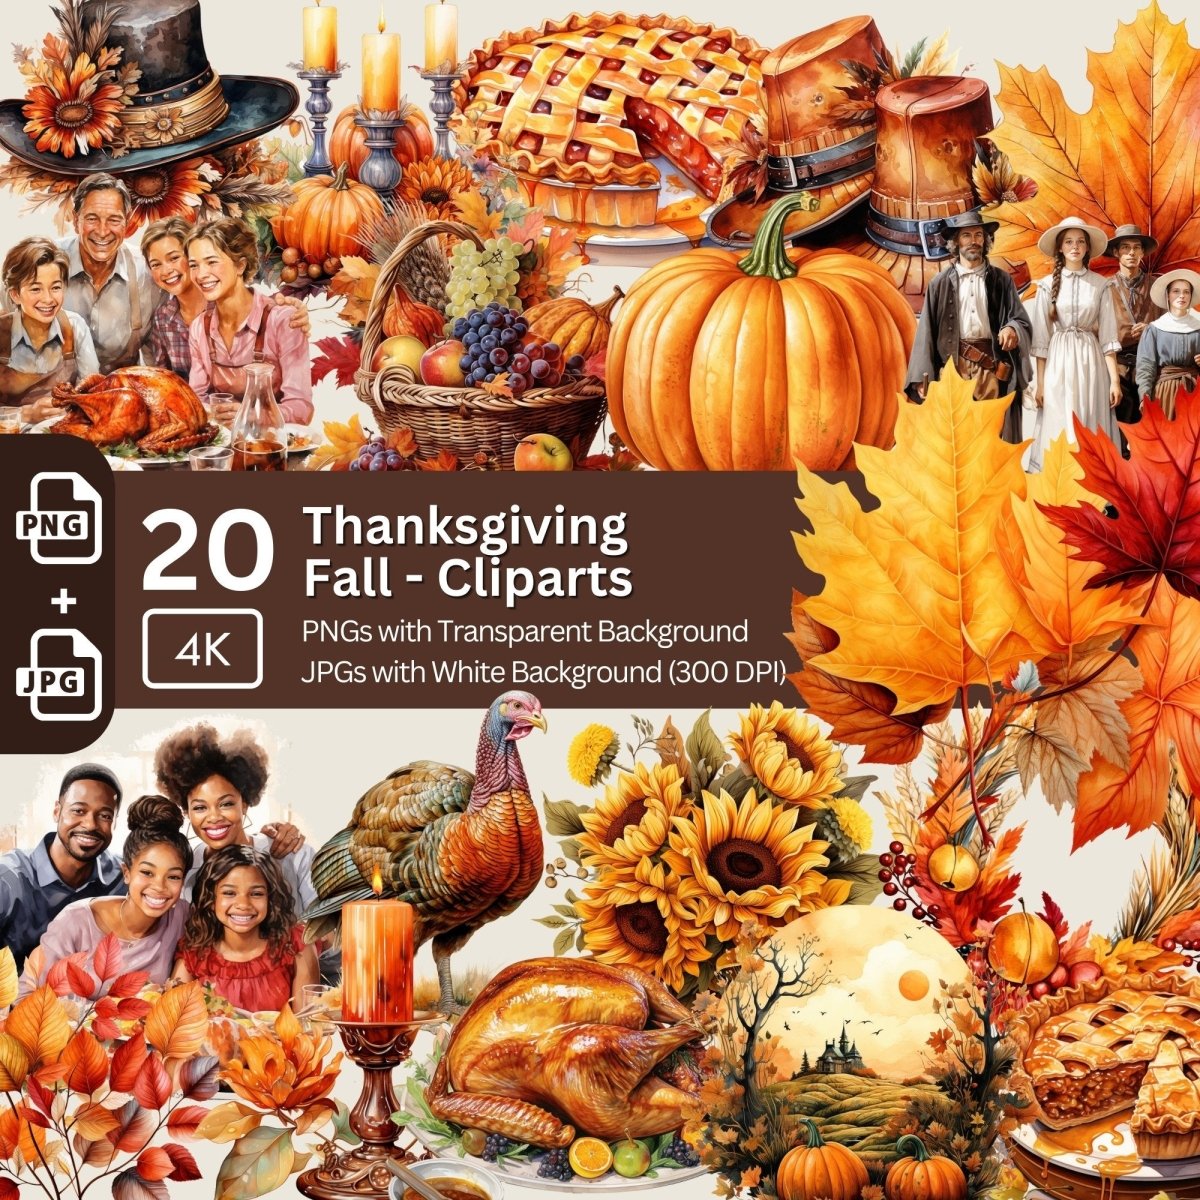 Thanksgiving Clipart Bundle 20 + 20 PNG JPG Fall Graphics - Everything Pixel